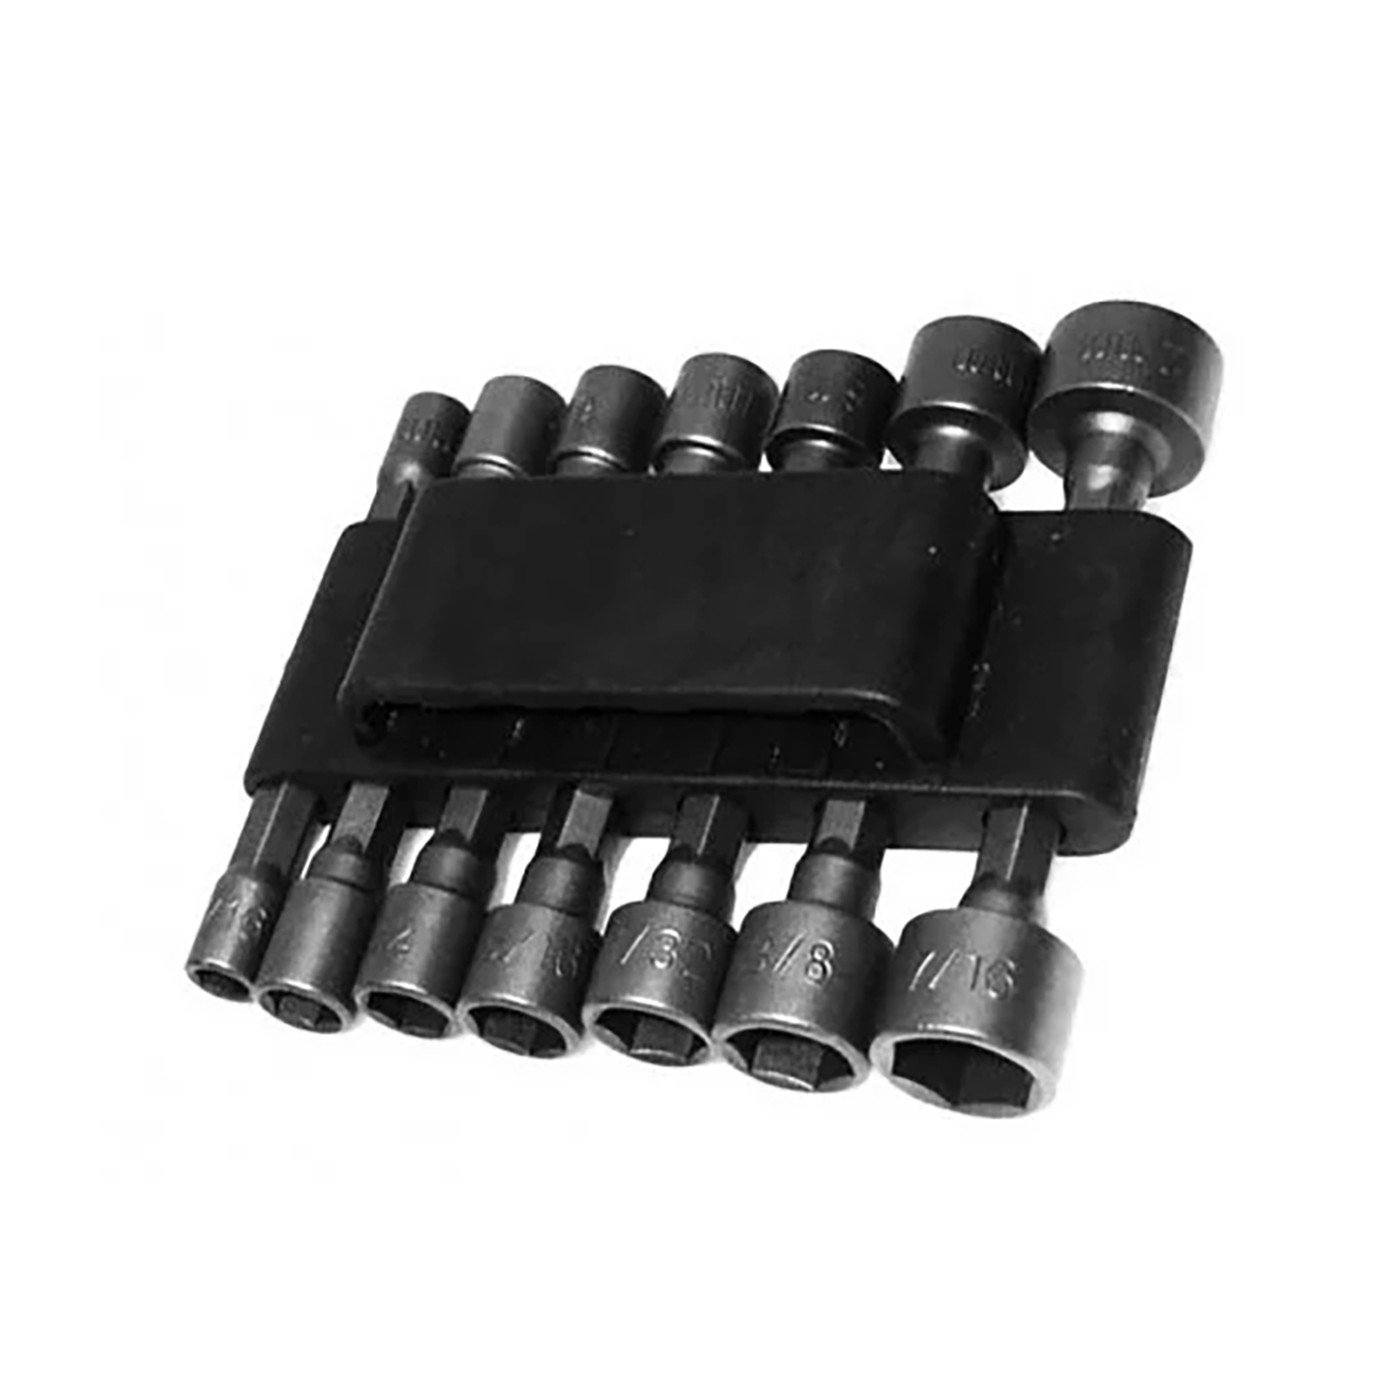 Hex socket sleeve bits (14 pieces, metric and imperial)